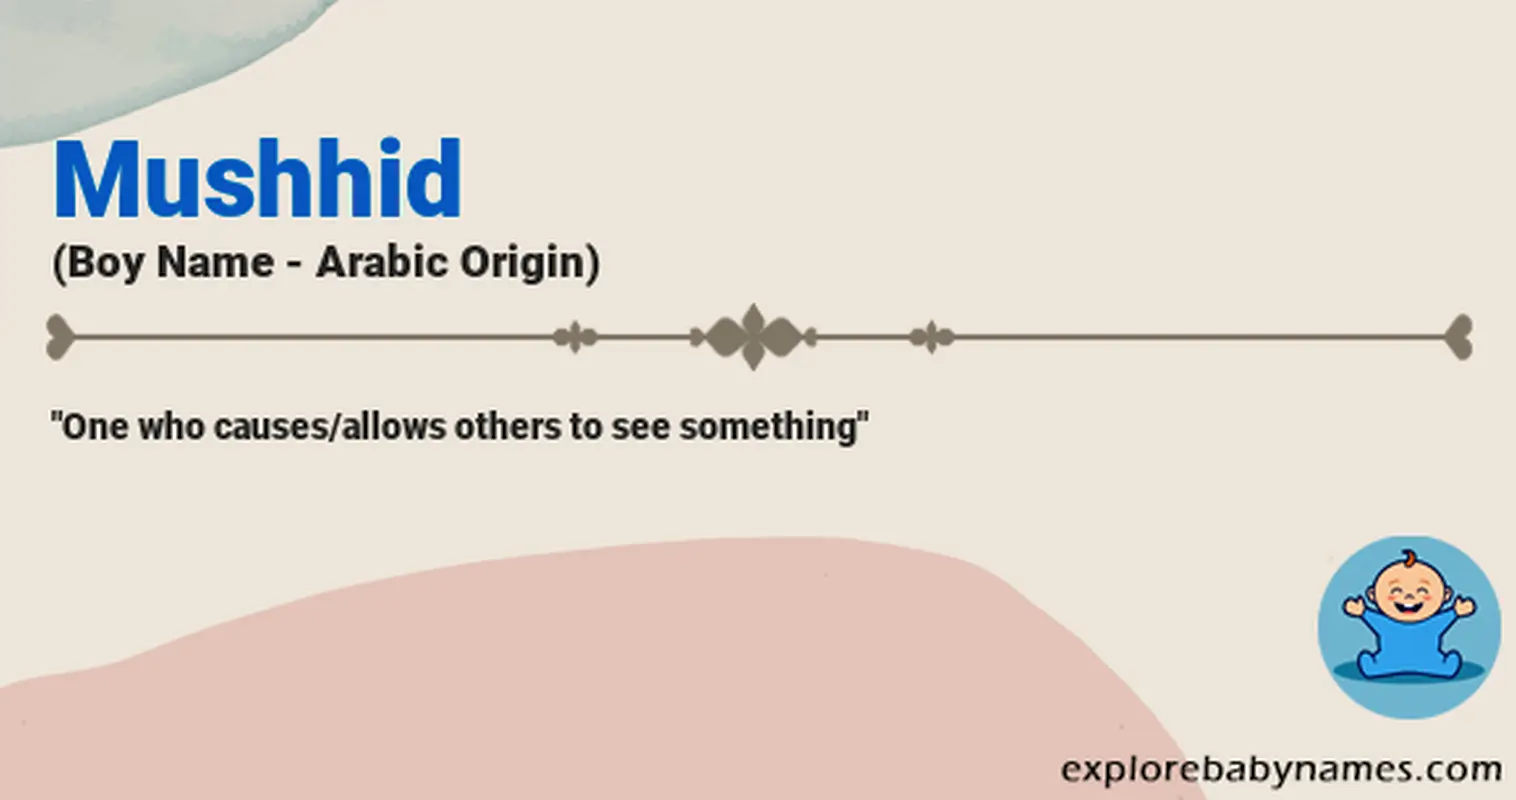 Meaning of Mushhid